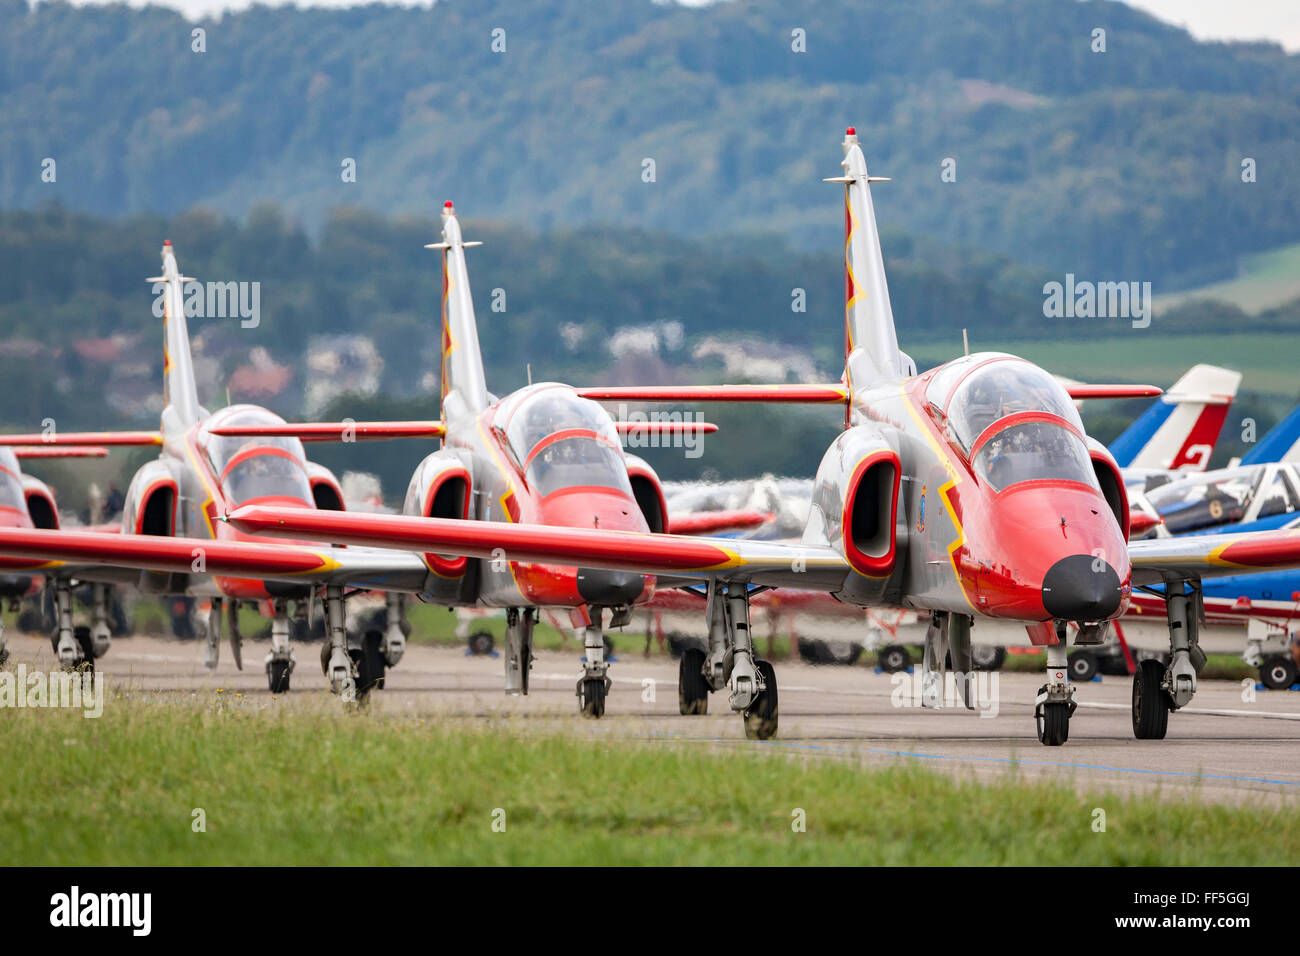 CASA C-101 Aviojets of “Patrulla Aguila” the formation aerobatic team of the Spanish Air force. Stock Photo